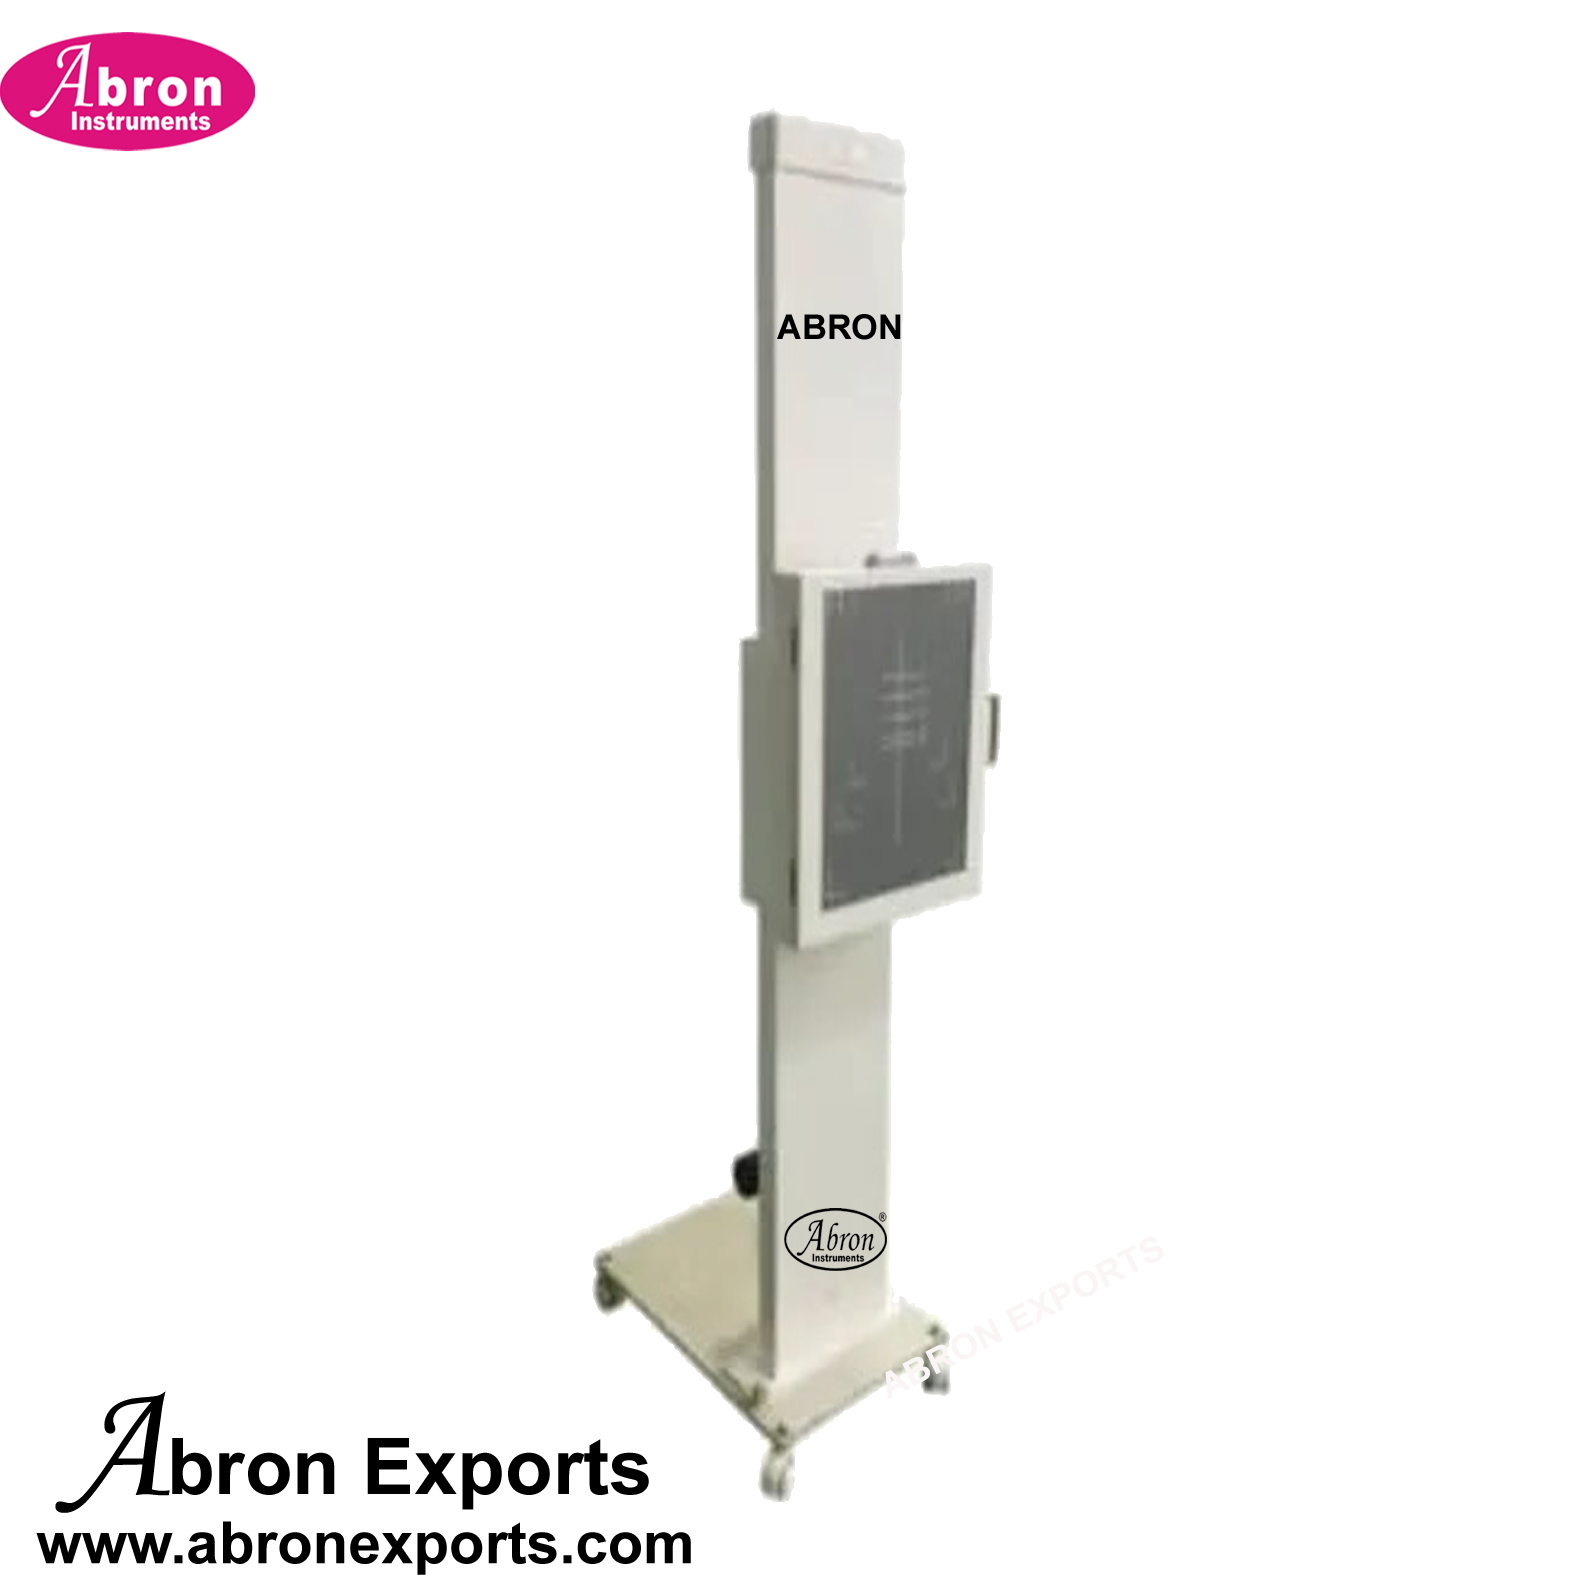 ABM-2782P1H Ortho x-ray machine Piller 100mA Piller fixed with controller and stand setup Nursing Home Hospital Abron ABM-2782P1H 